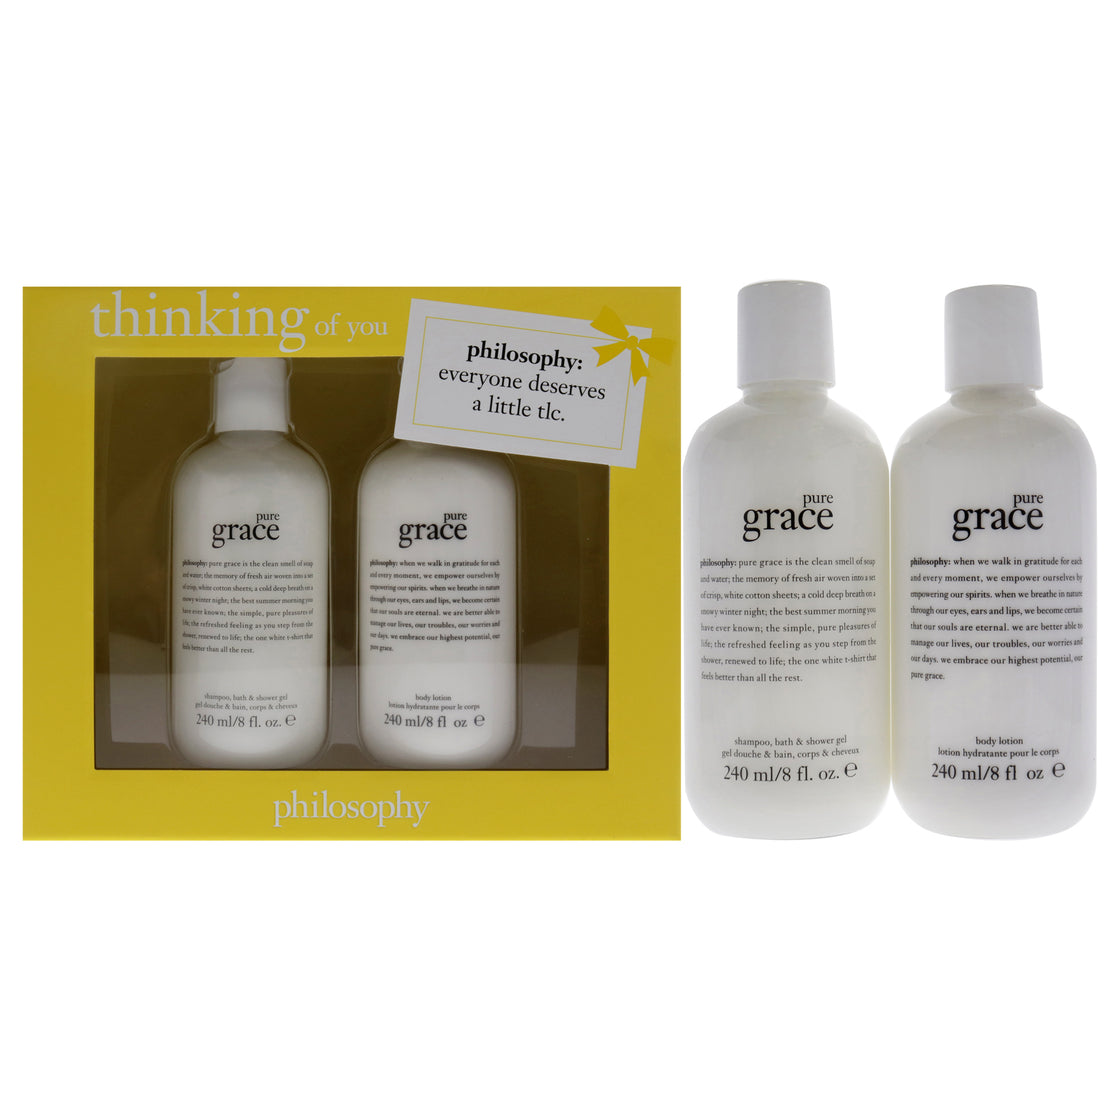 Thinking of You Kit by Philosophy for Women - 2 Pc 8oz Pure Grace Shampo Bath and Shower Gel, 8oz Pure Grace Body Lotion